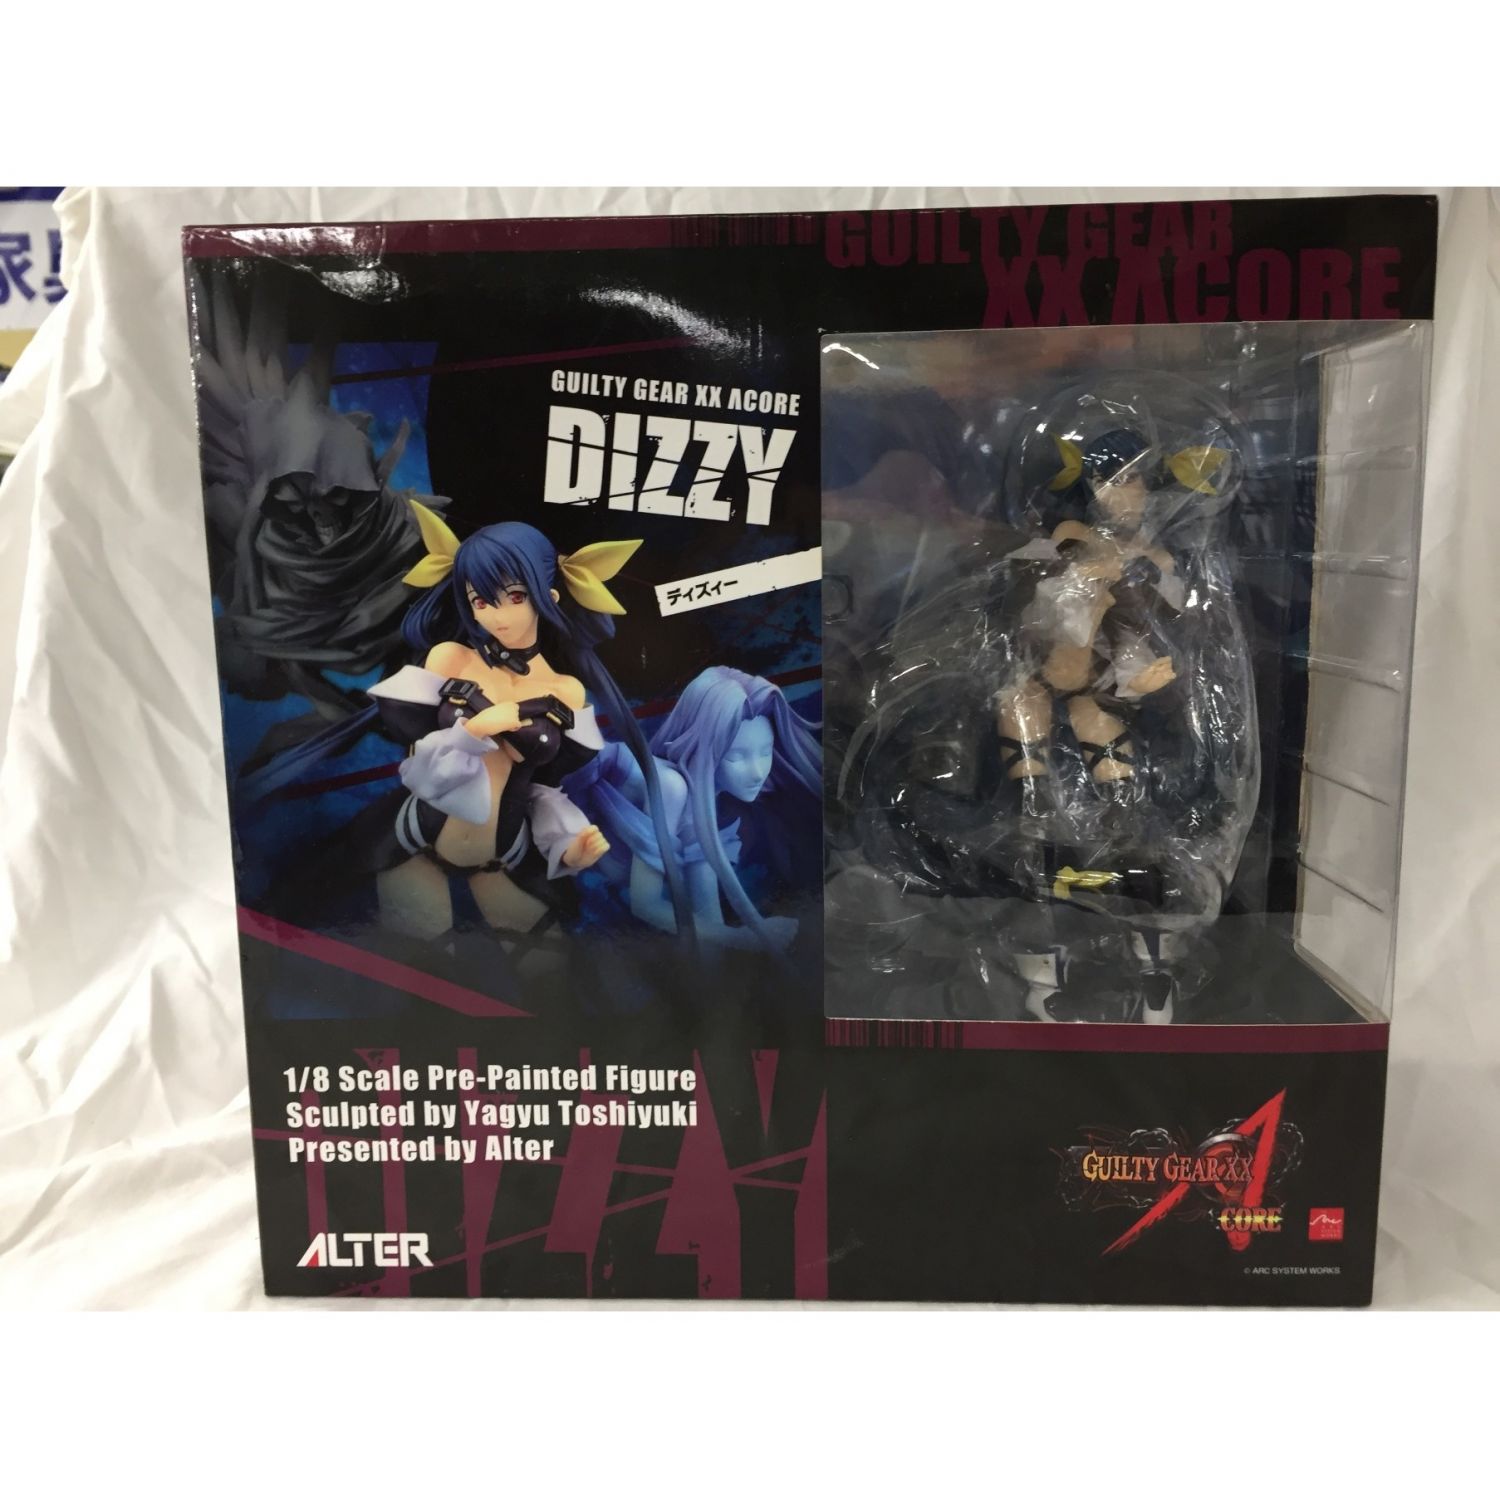 Alter アルター Guilty Ger Xx Acore ギルティギア ディズィー 入荷 トレファクonline